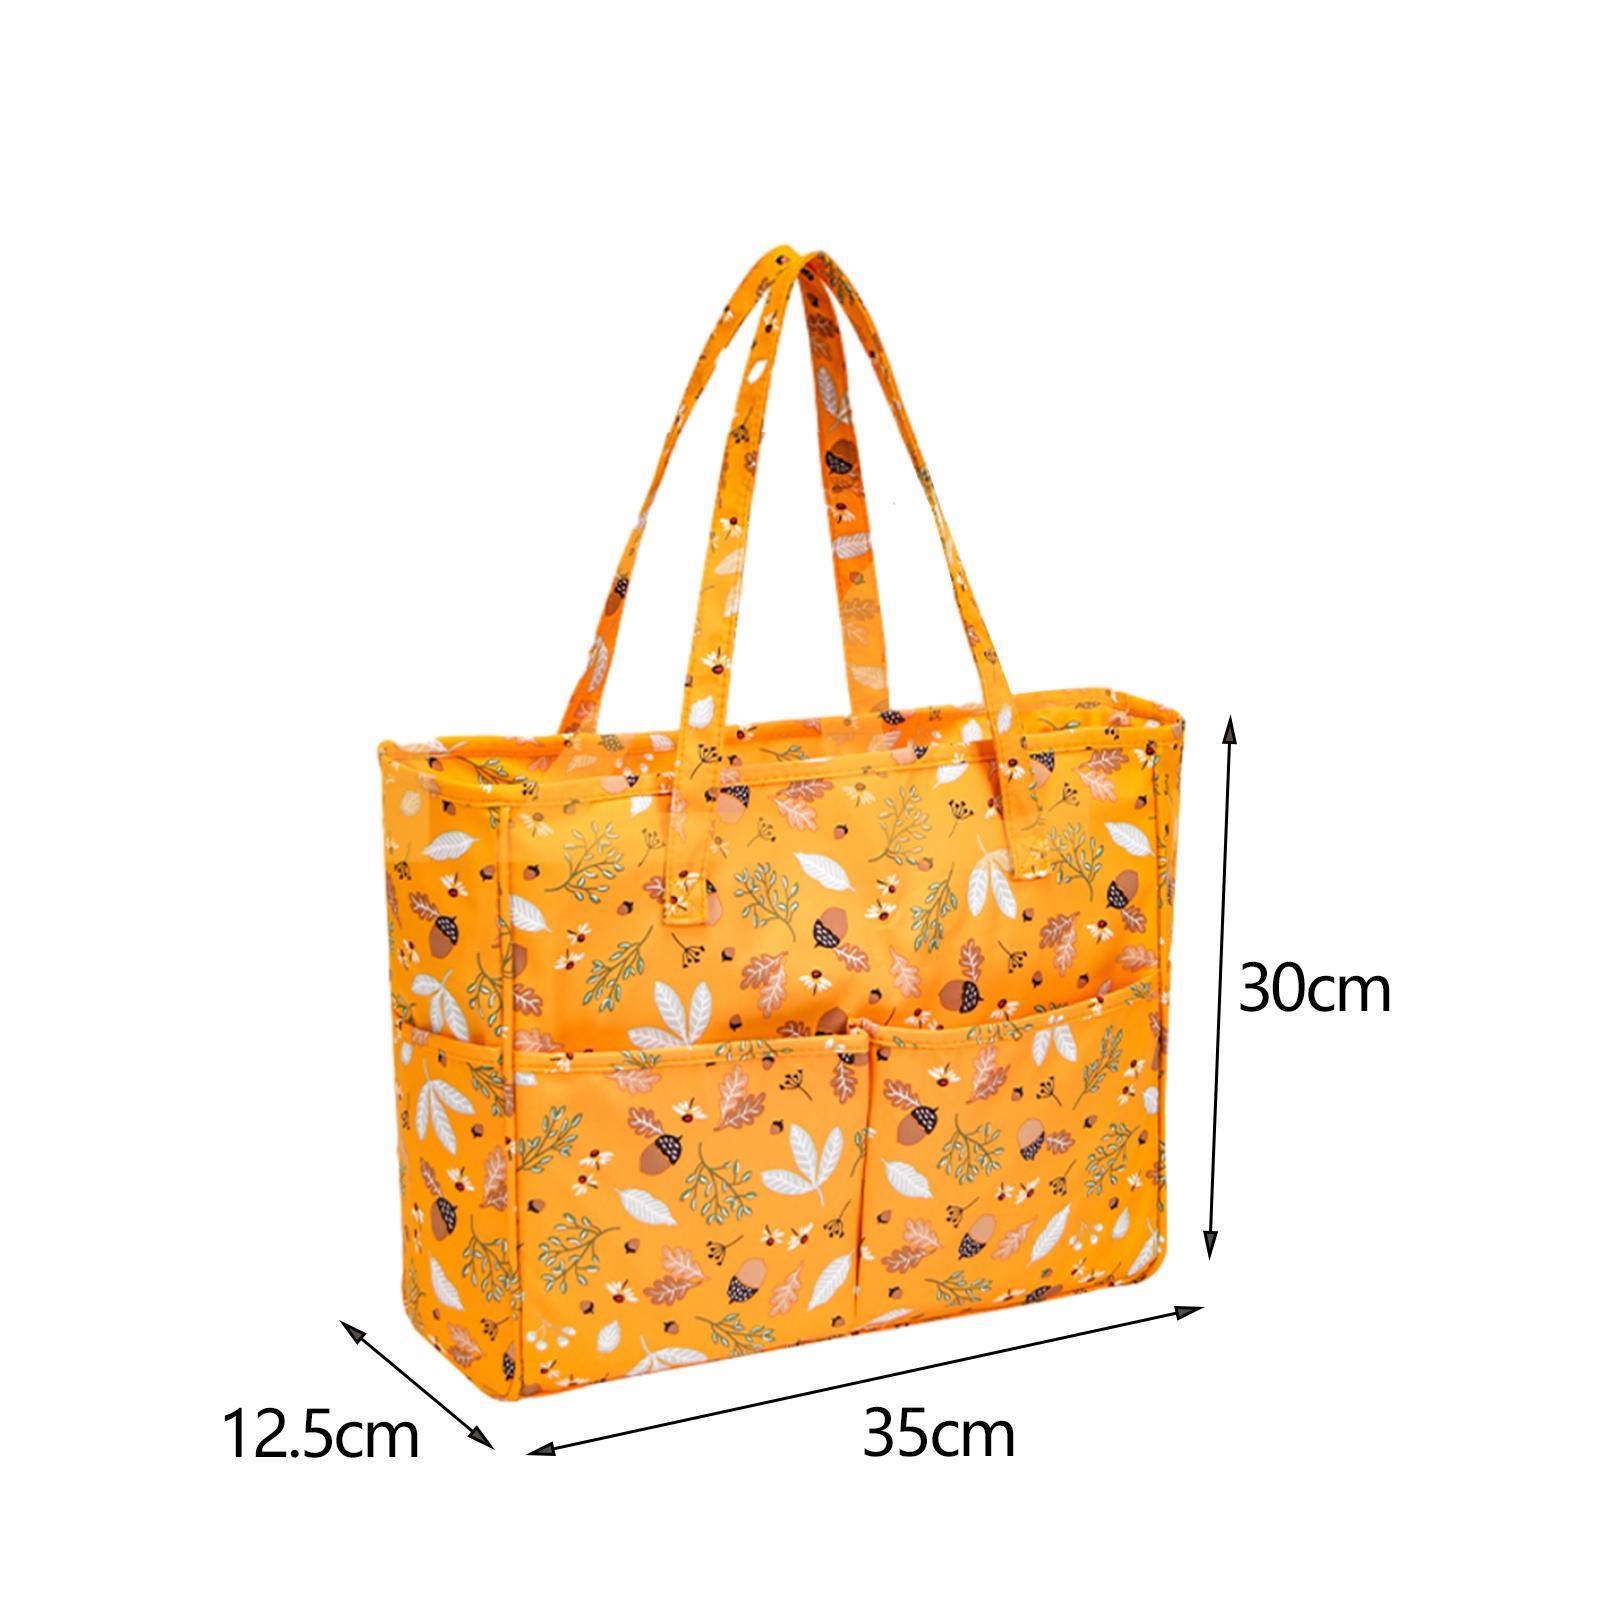 Yarn Storage Bag Portable Practical Multi Pockets Oxford Cloth Multiuse Knitting Bag Large Capacity for Household Travel Embroidery Supplies